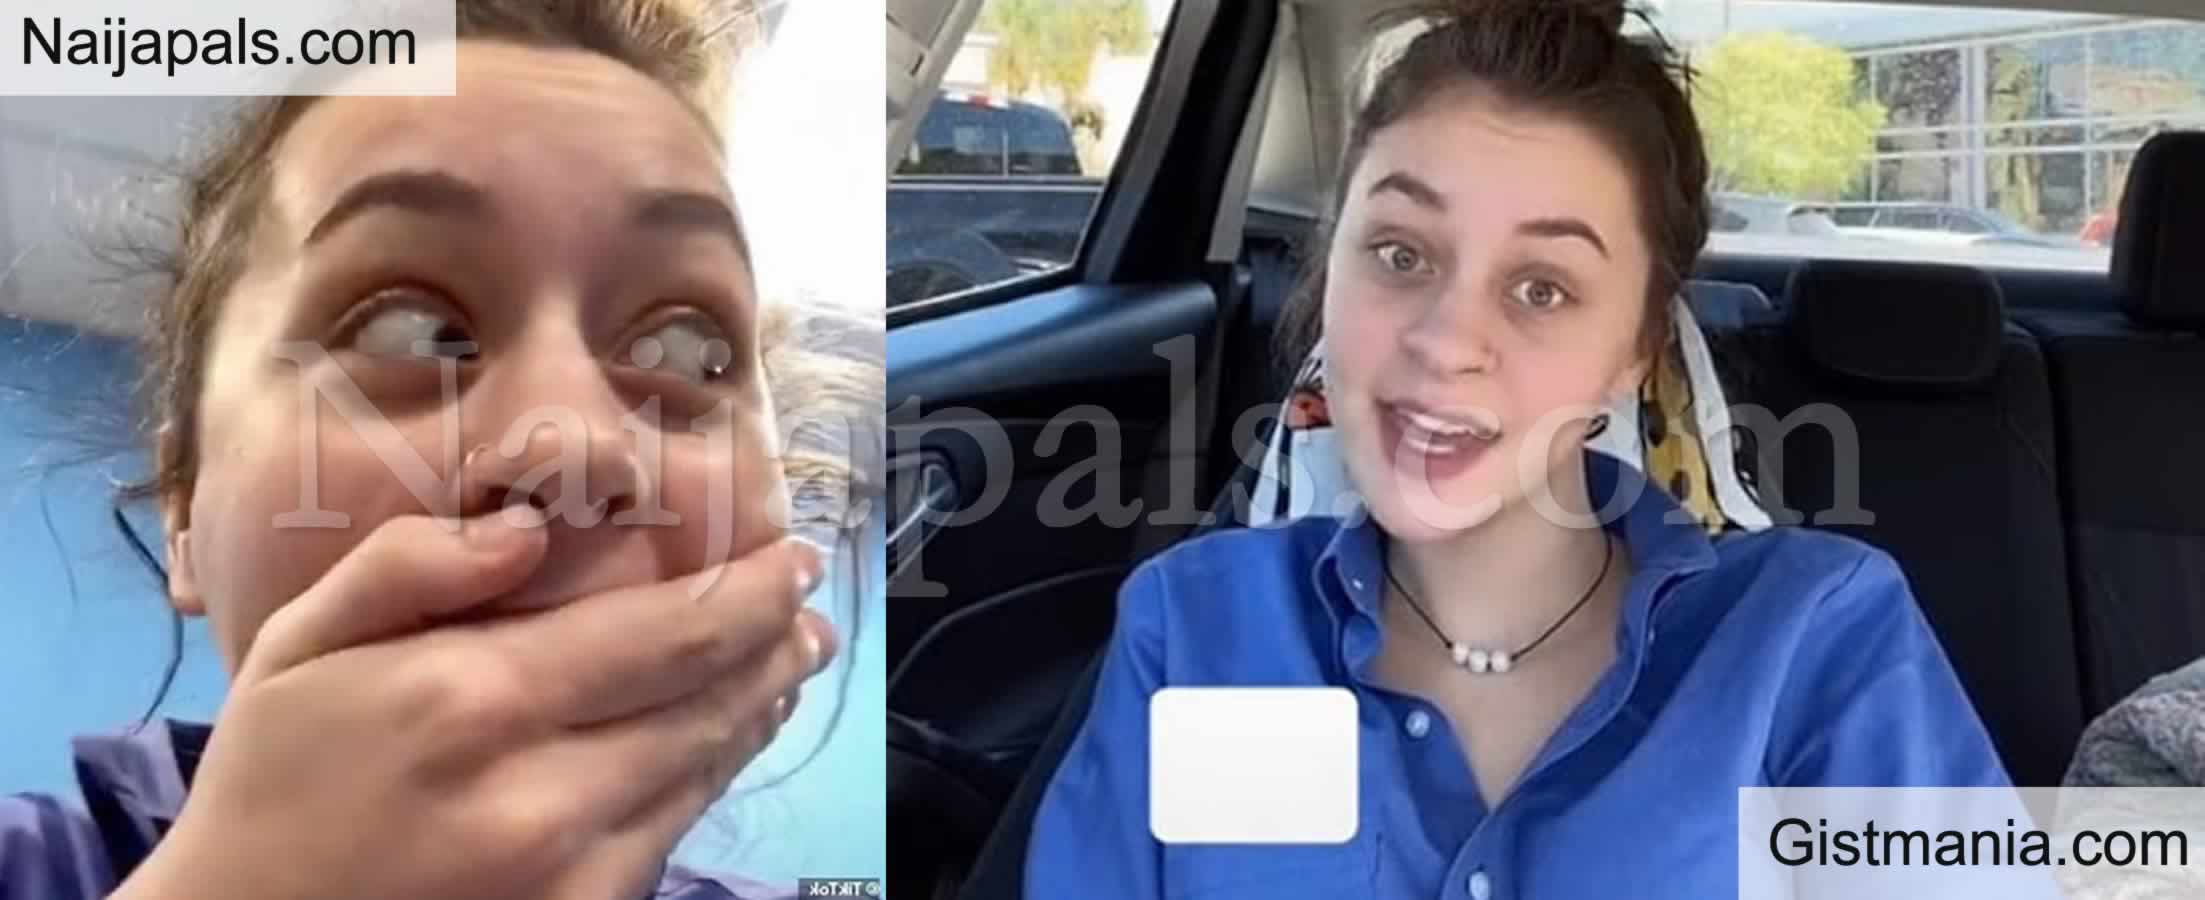 Teen Girl Gets Fired After Making Video Pretending To Catch Her Boss Having S3x With Secretary